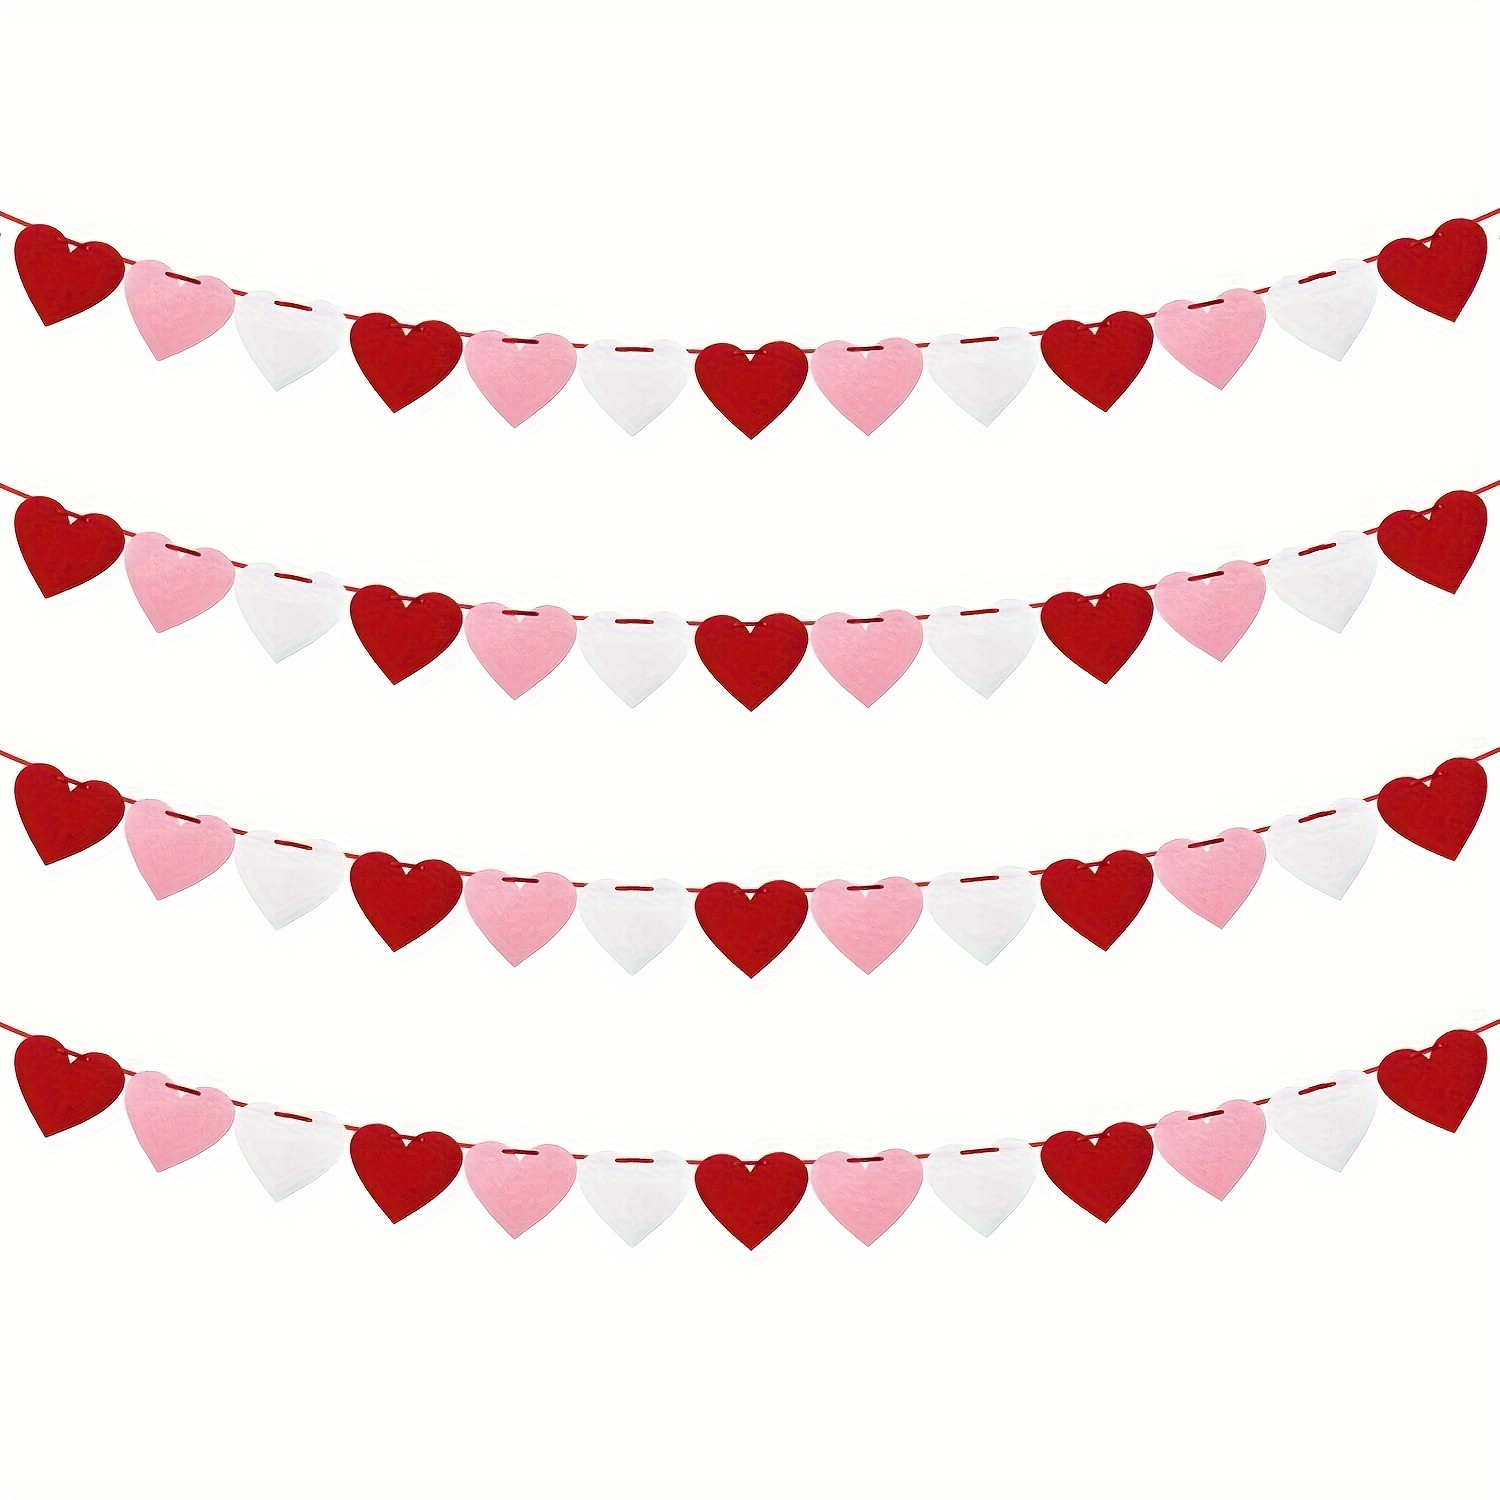 6pcs Hanging Heart Swirl Decorations Red Heart Swirls Spiral Wedding  Decorations No DIY Romantic Decorations Shiny Foil Red Swirls For  Valentines Day